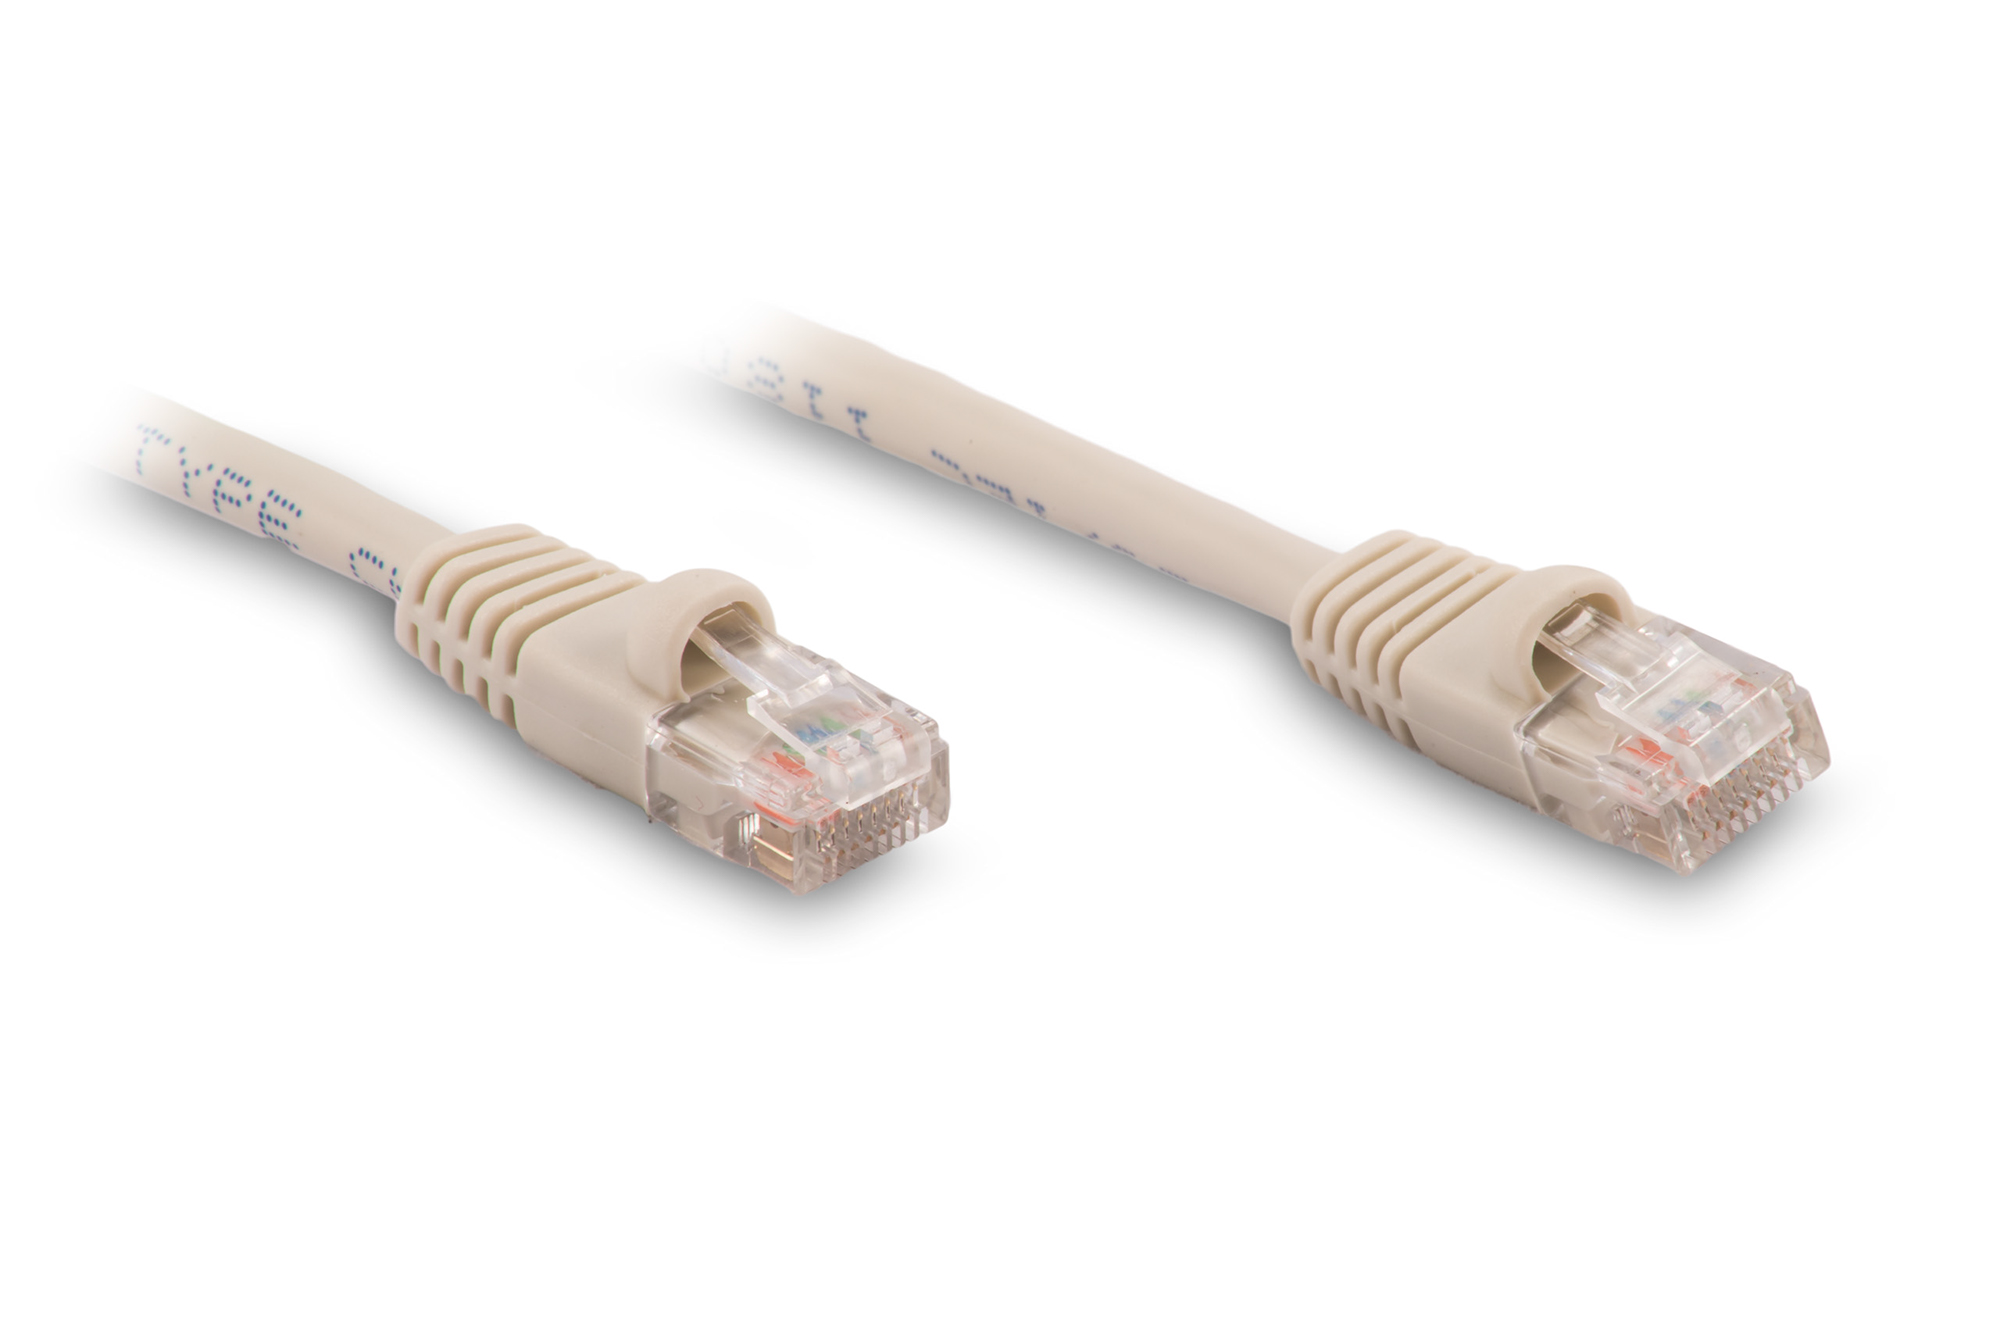 12ft Cat5e Ethernet Patch Cable - Gray Color - Snagless Boot